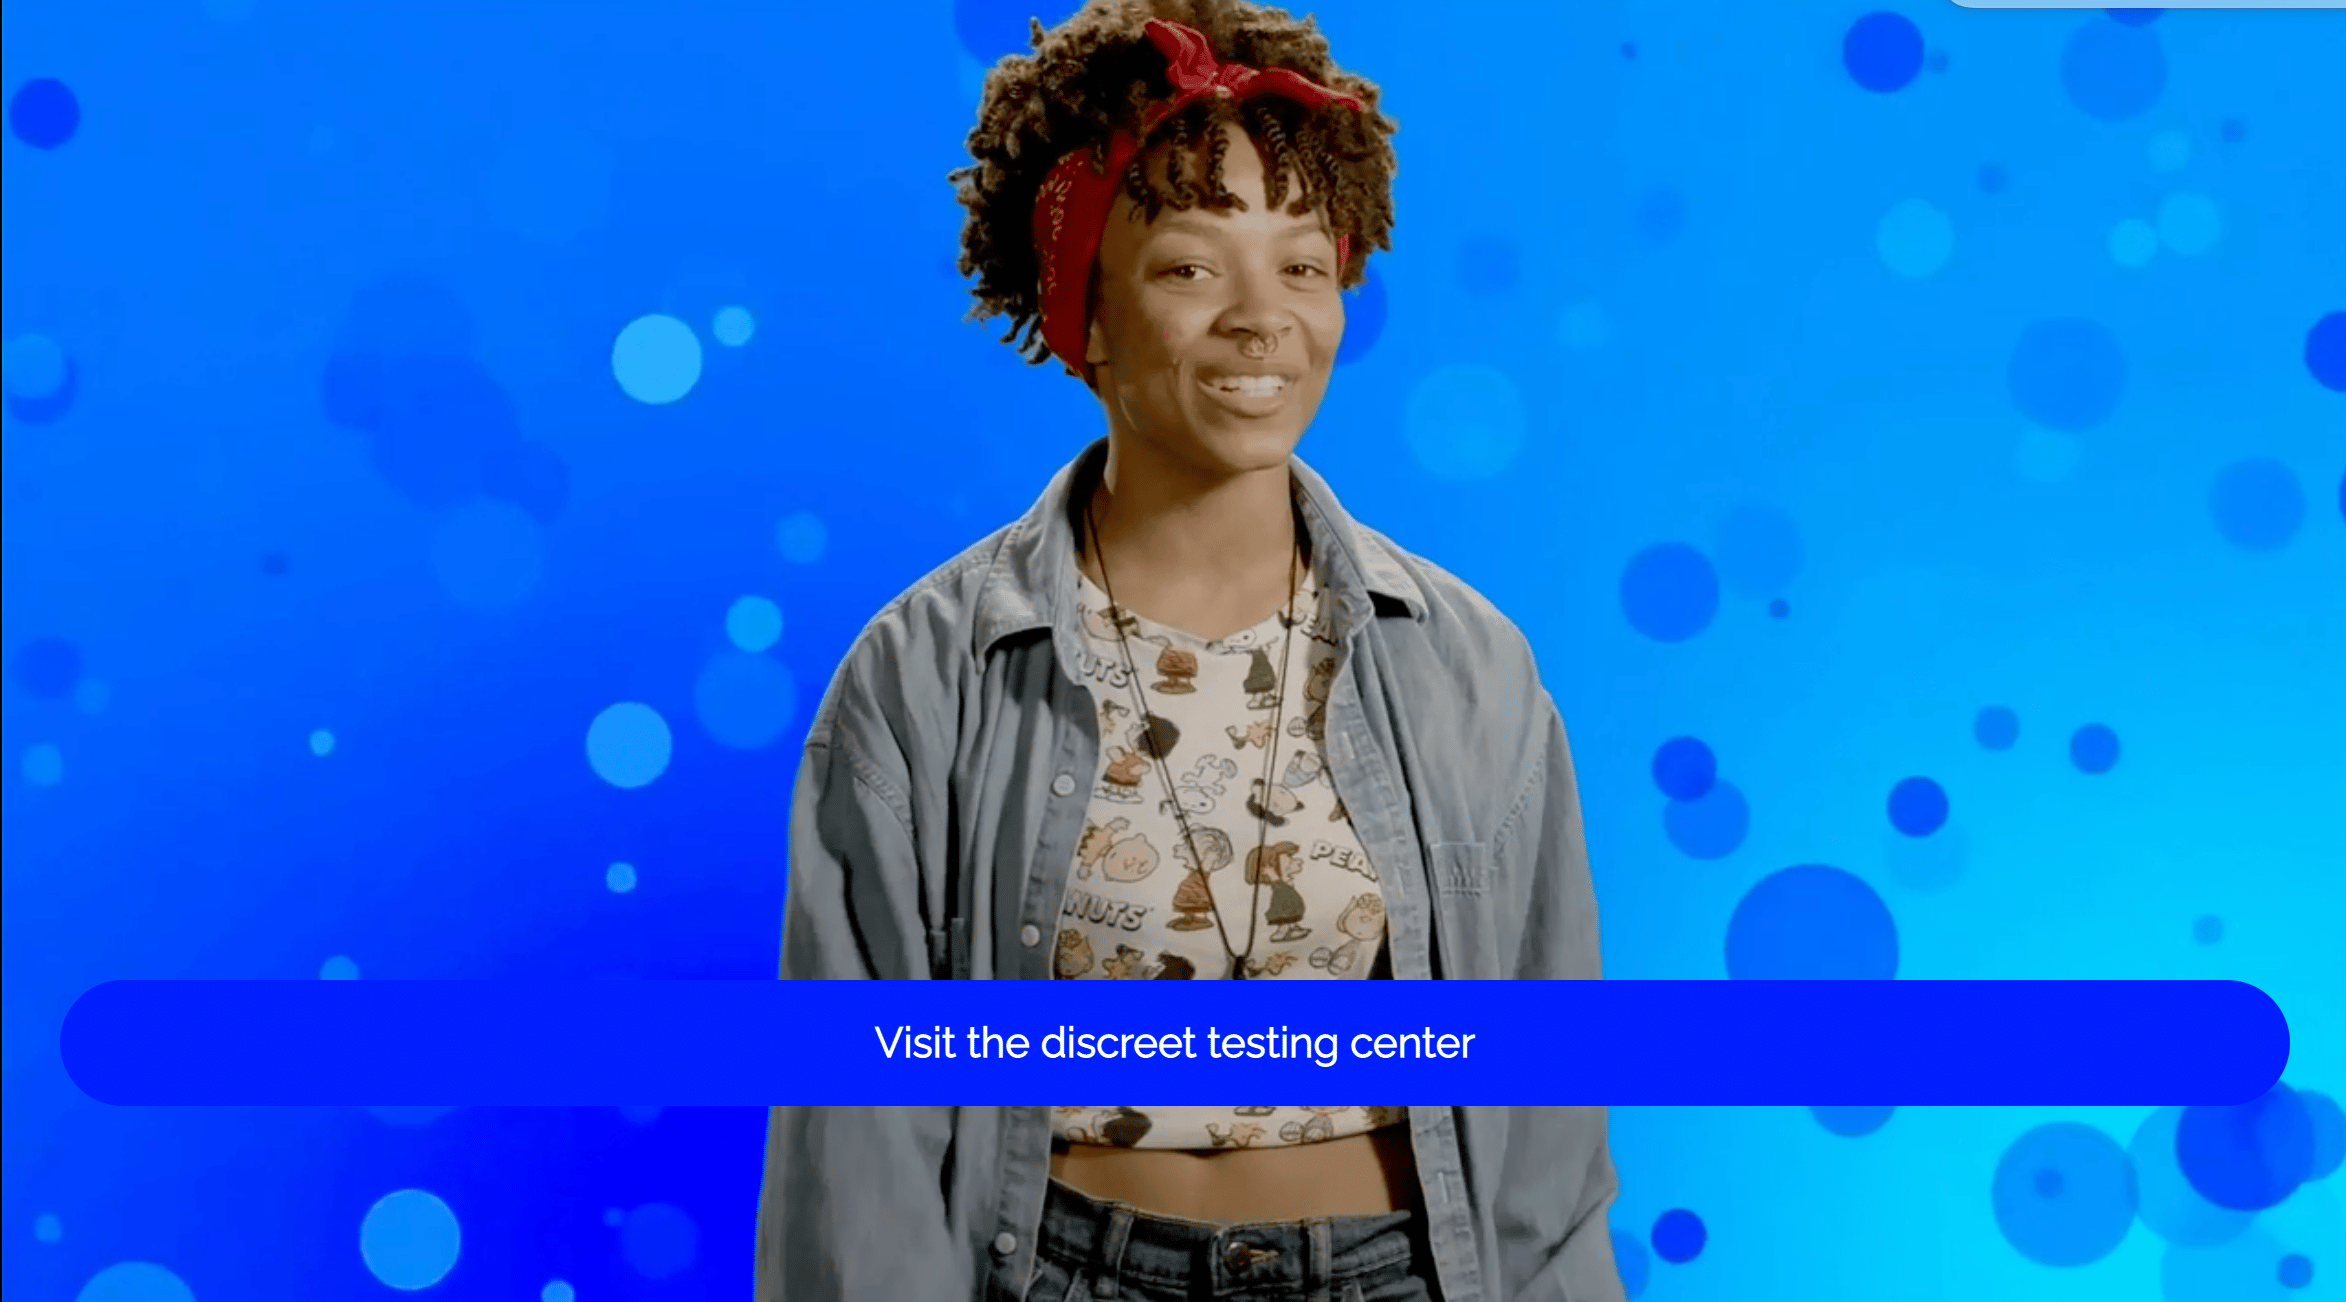 DatingForward - behaviour changing interactive video - A woman stands in front of a blue background. She is wearing a red scarf in her hair, a long open shirt and a crop t shirt. She is talking to camera. A blue box with white writing contains the words: "Visit the discreet testing centre"